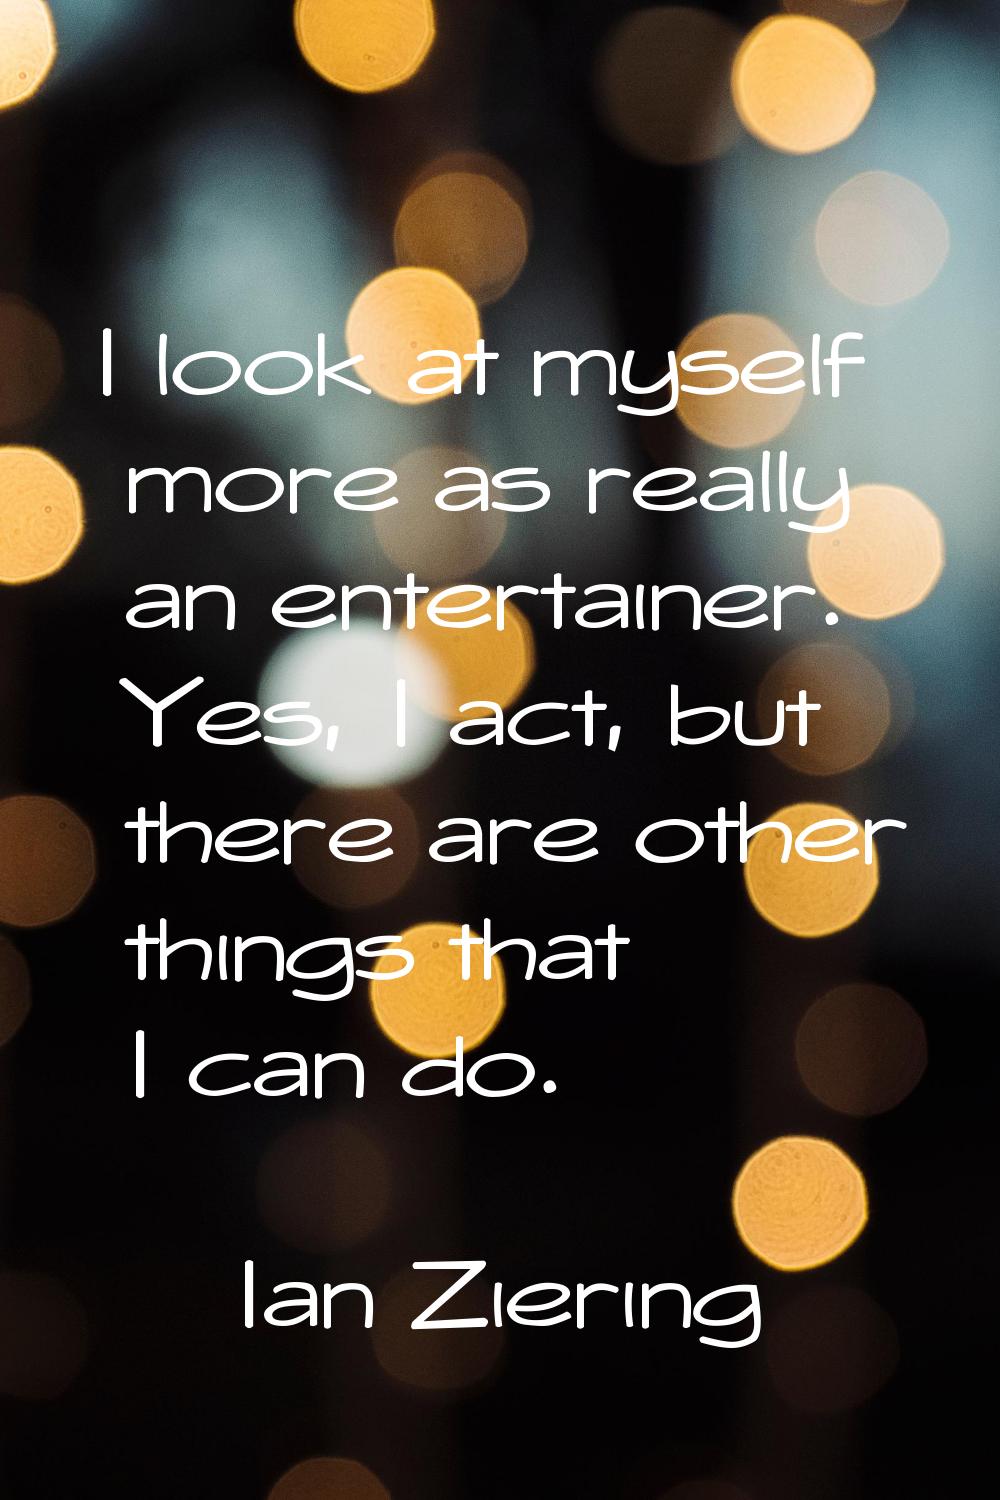 I look at myself more as really an entertainer. Yes, I act, but there are other things that I can d